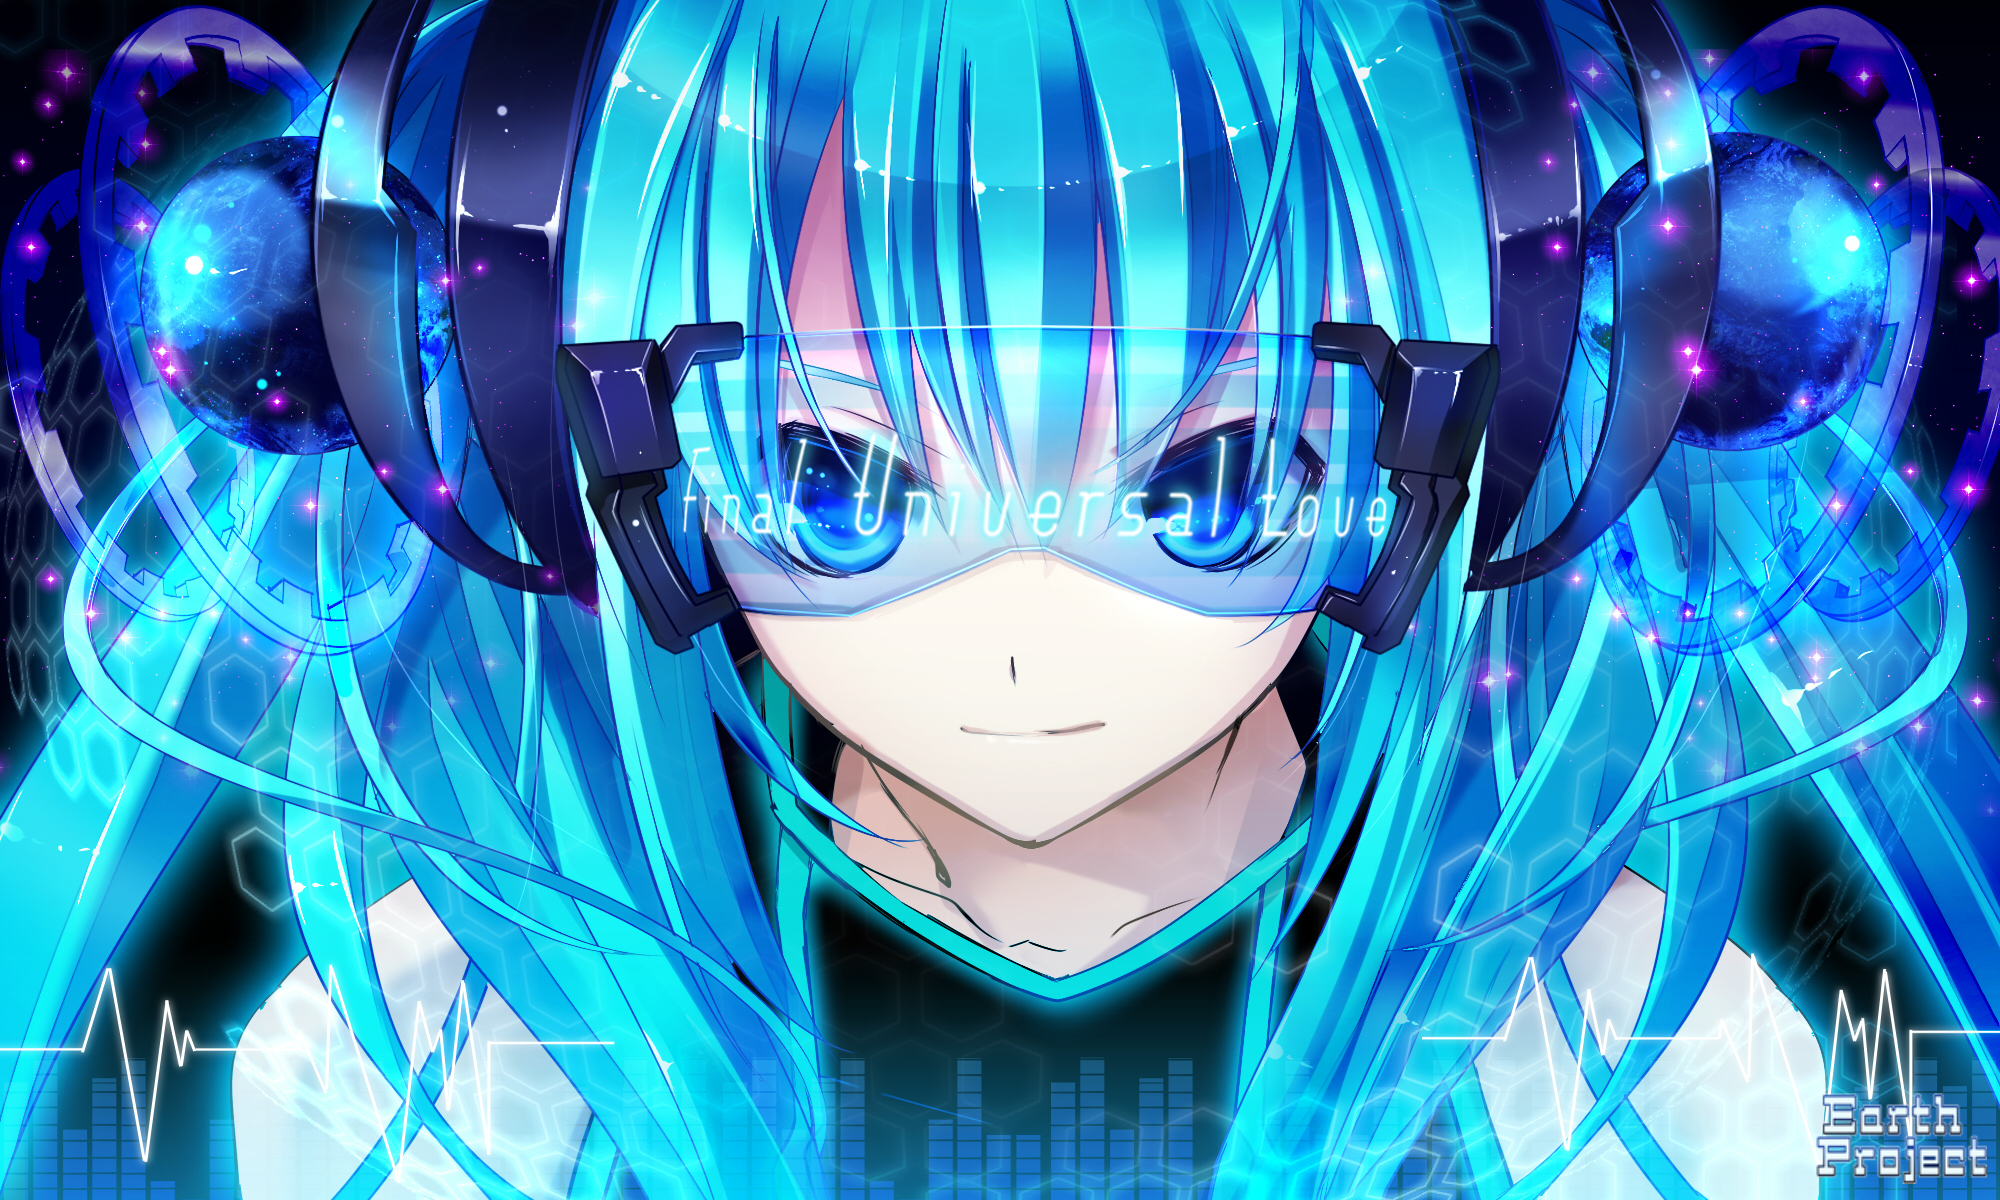 Popular Vocaloid Image for Phone